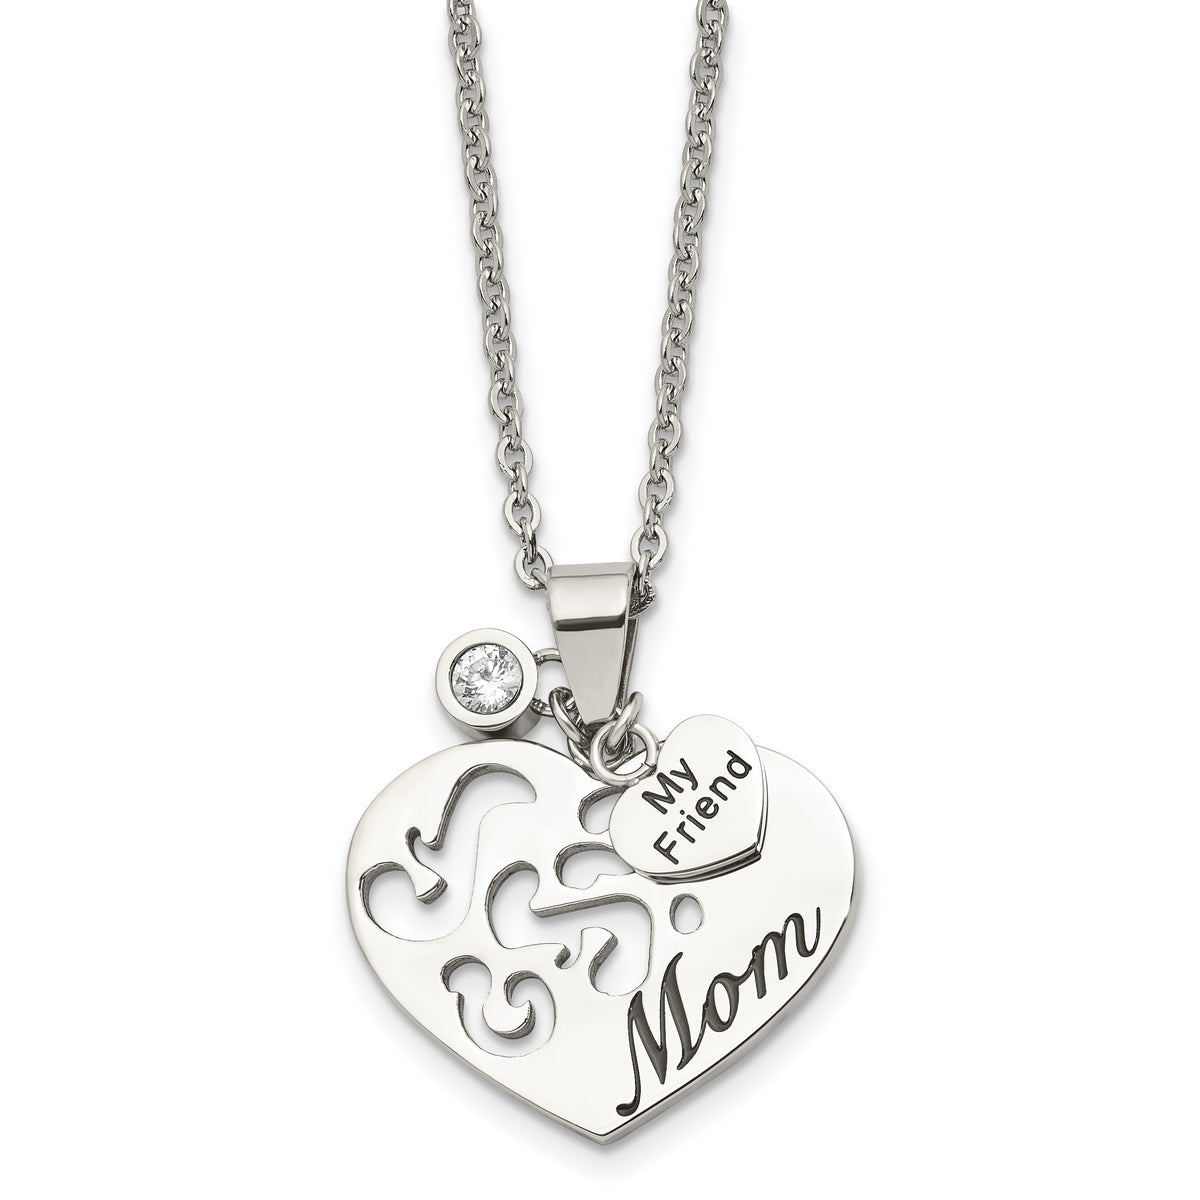 Chsiel Stainless Steel Antiqued Polished and Enameled MOM MY FRIEND with CZ Heart Pendant on a 24 inch Cable Chain Necklace